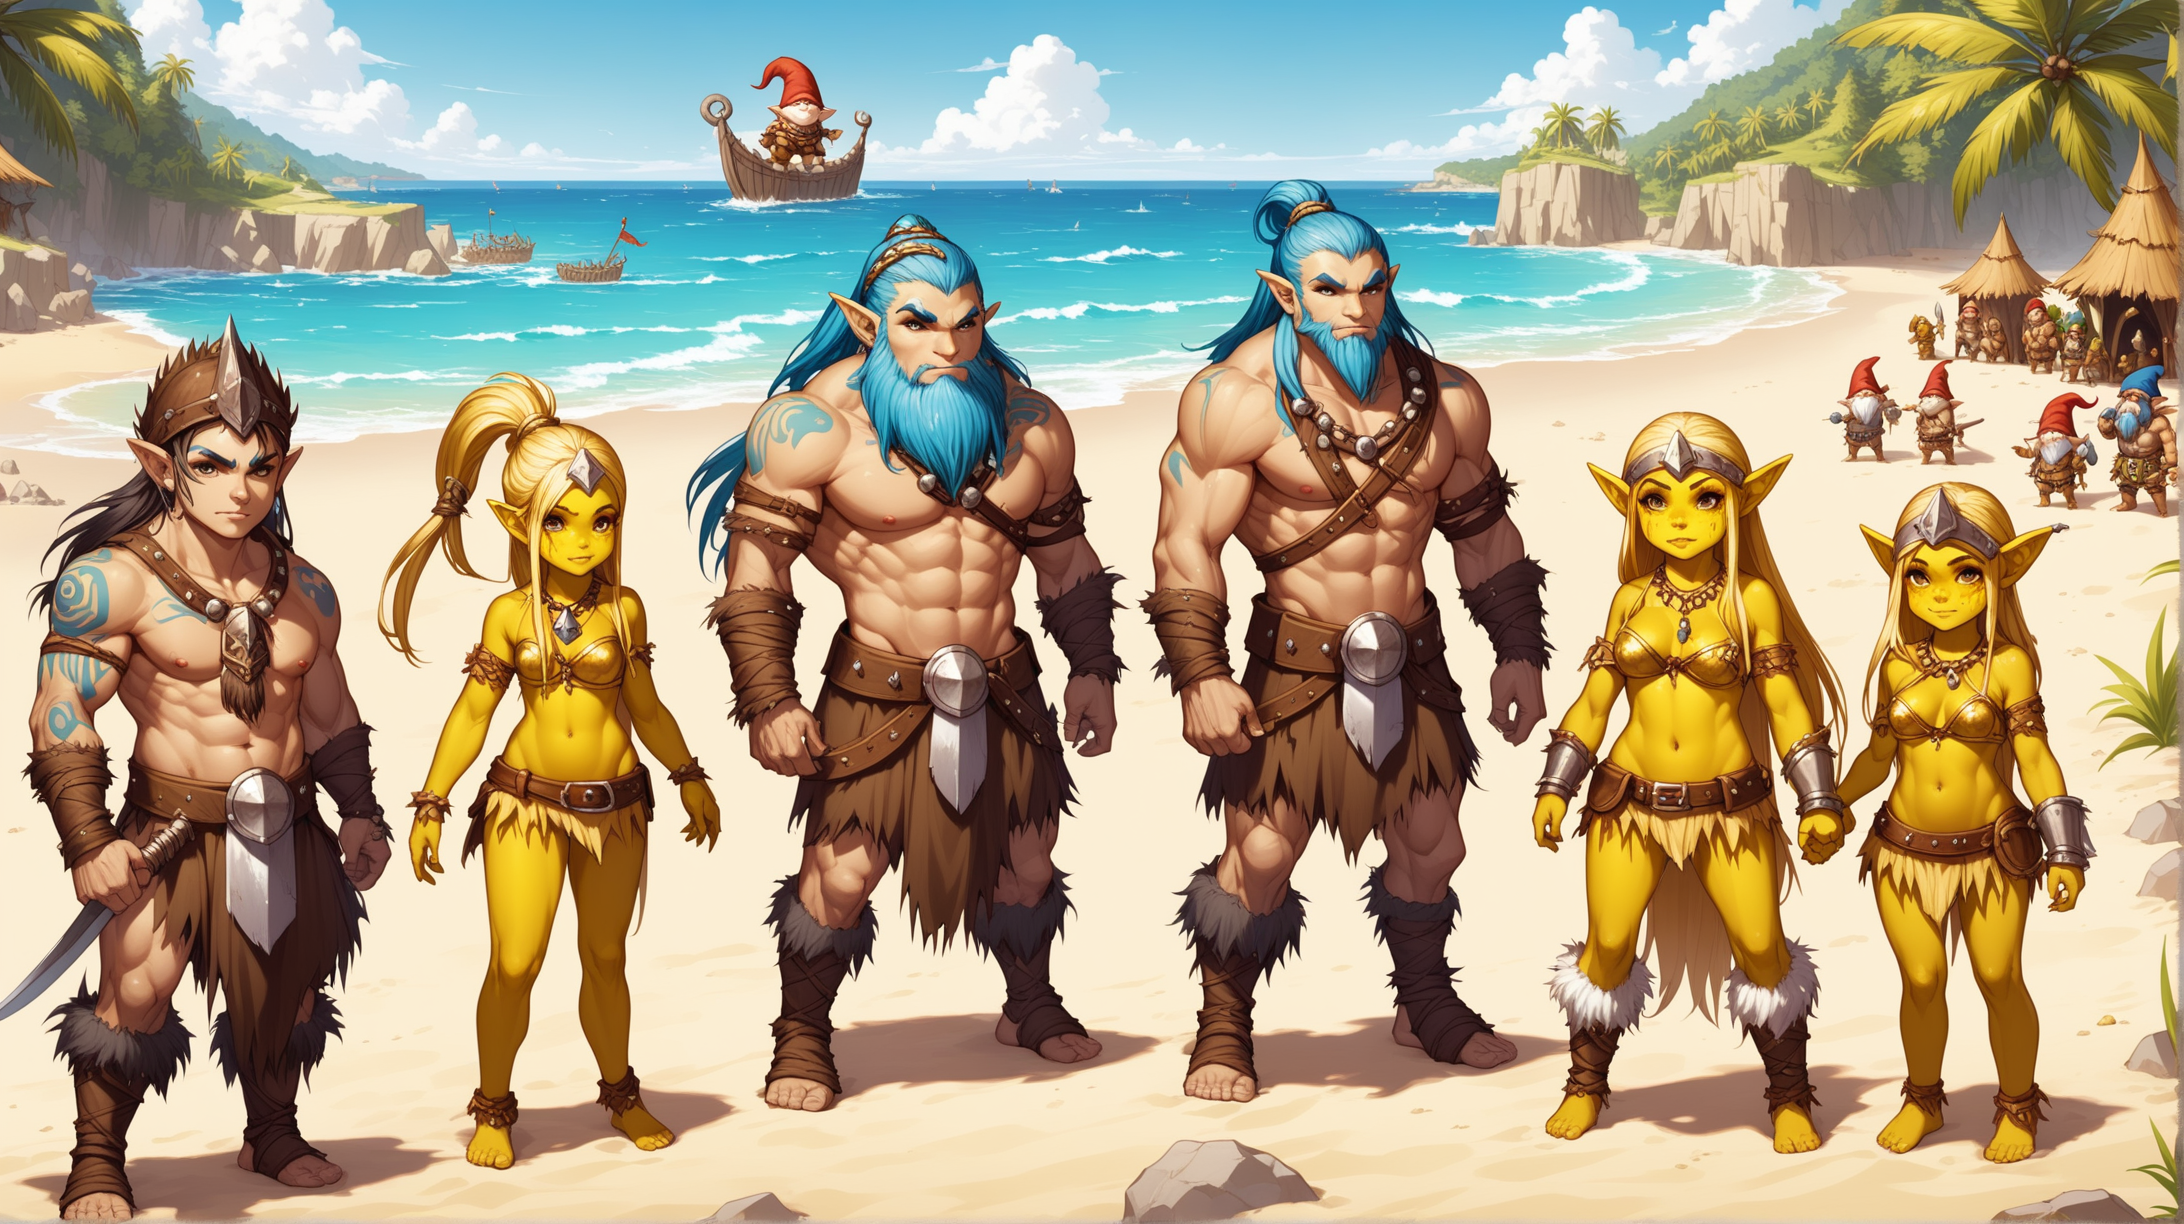 Medieval Fantasy Scene Golden Gnomes Shamans Barbarians and YellowSkinned Boys and Girls on a Sandy Beach